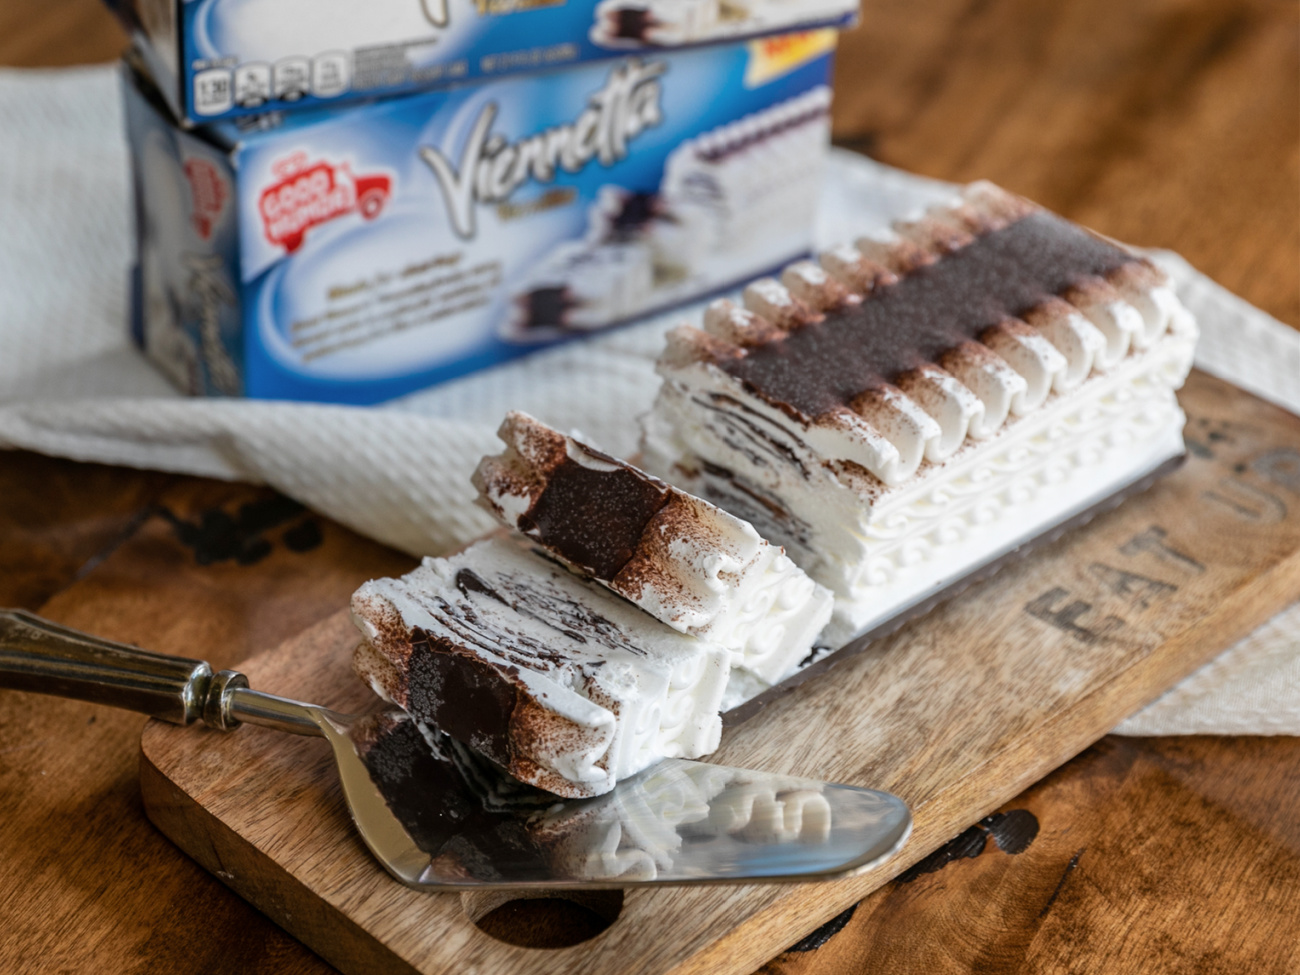 Good Humor Viennetta Cake Is A Delicious Dessert Your Whole Family Will Love - Save At Publix! on I Heart Publix 2